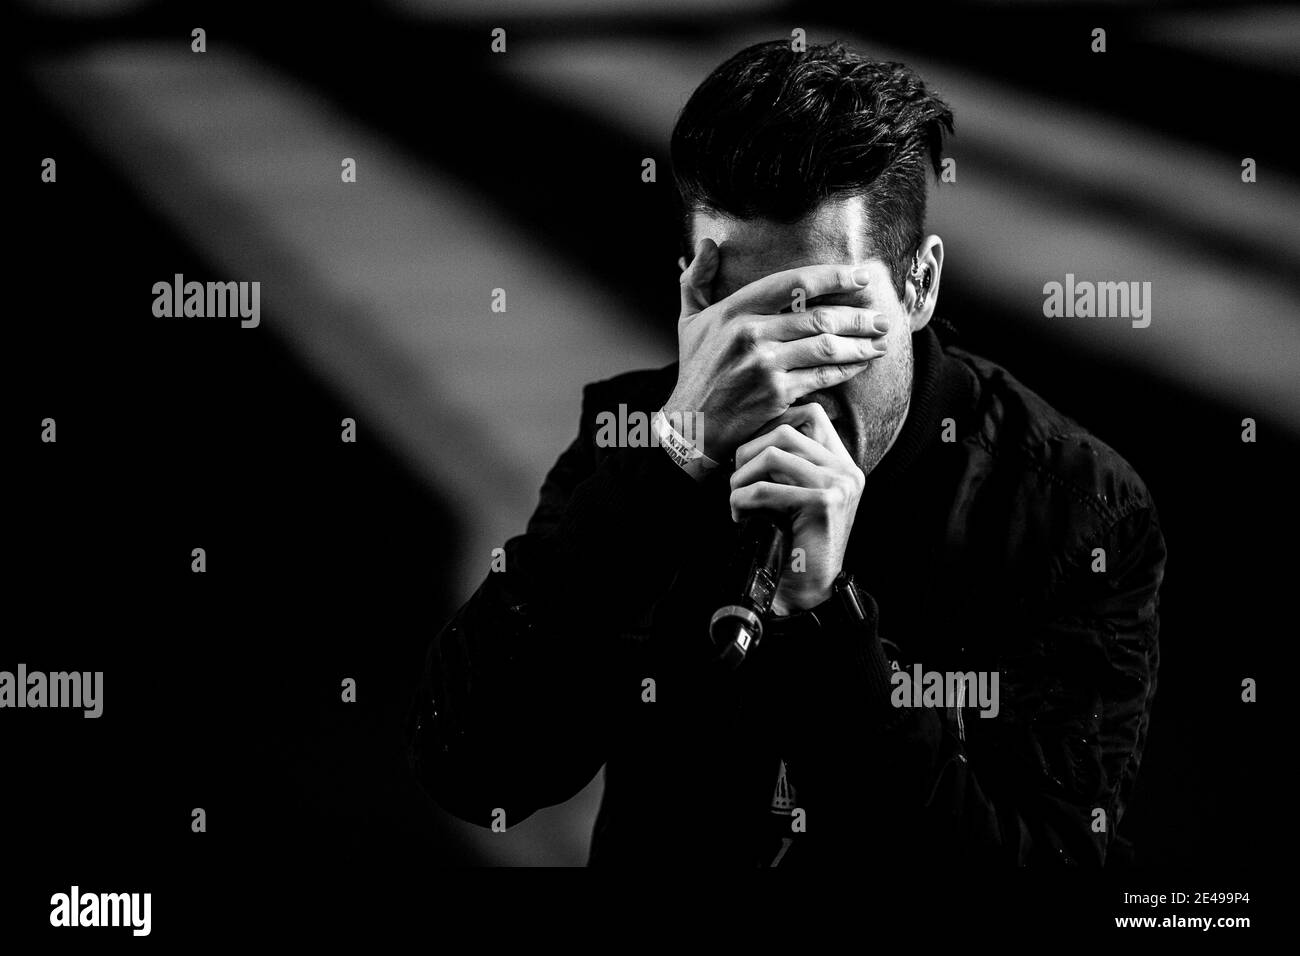 Aarhus, Denmark. 09th, June 2017. The English synth pop band Bastille performs a live concert during the Danish music festival Northside 2017 in Aarhus. Here lead singer Dan Smith is seen live on stage. (Photo credit: Gonzales Photo - Lasse Lagoni). Stock Photo